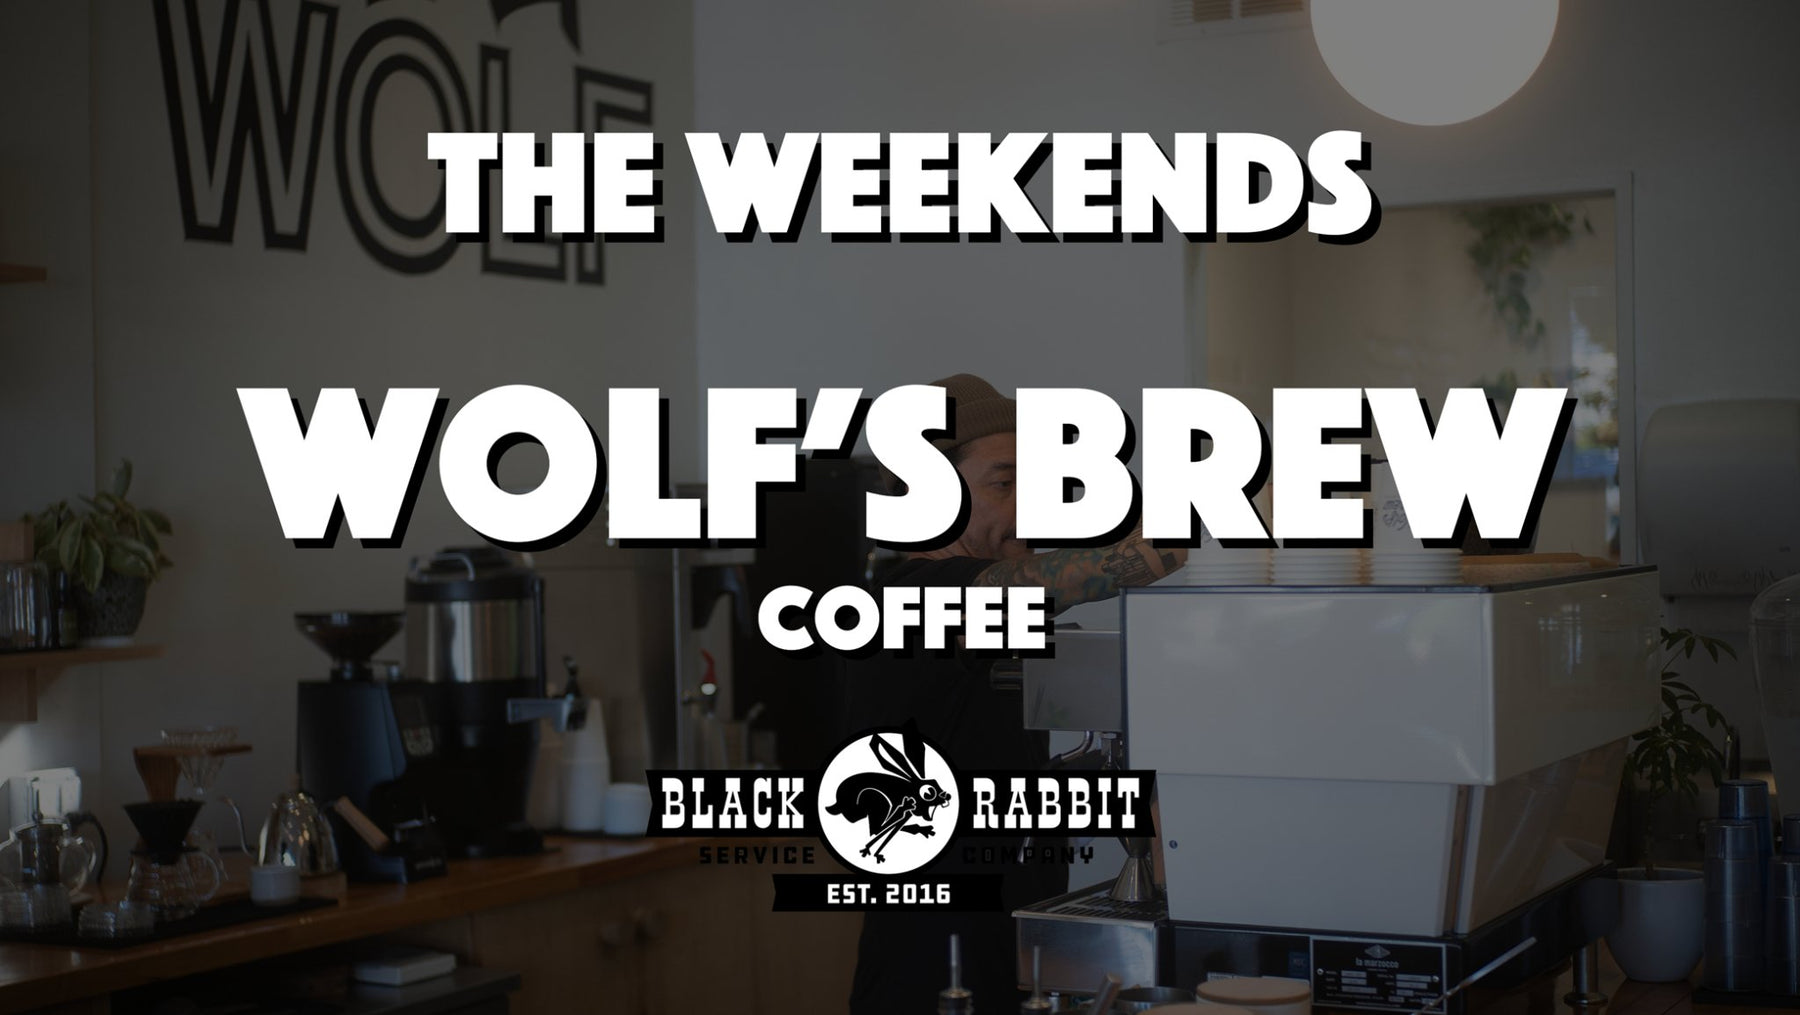 The Weekends: Wolf's Brew Coffee - Black Rabbit Service Co.